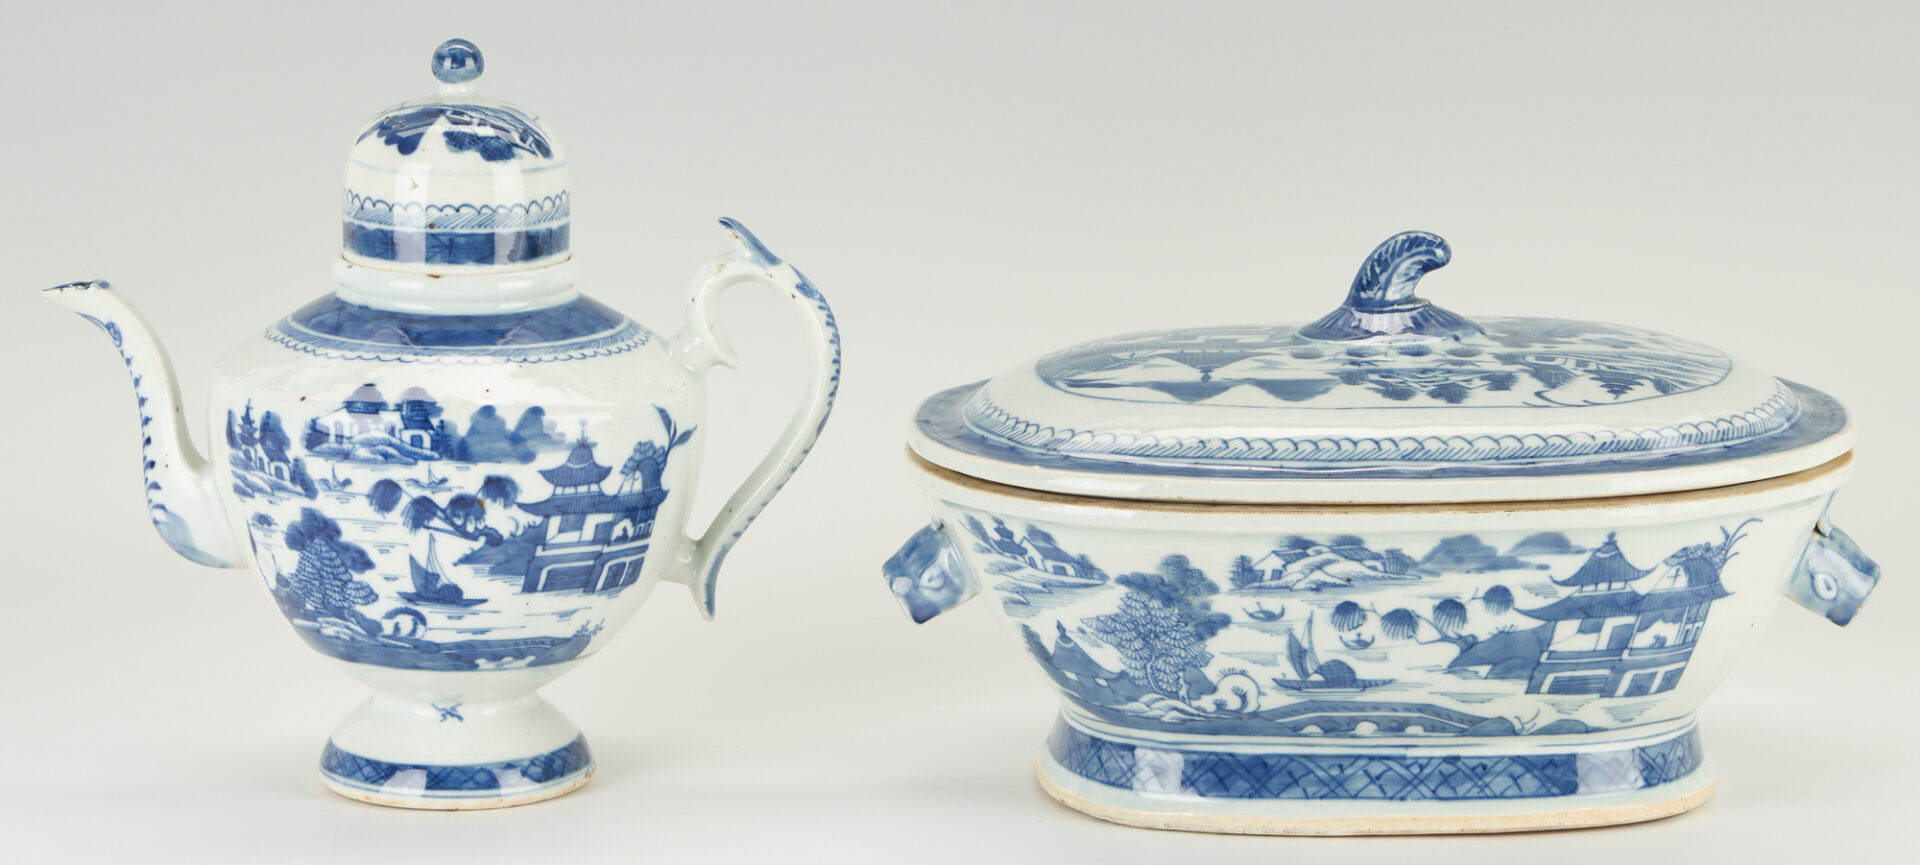 Lot 272: Assorted Canton and Spode Porcelain including Tureen and Platters, 13 Pcs.